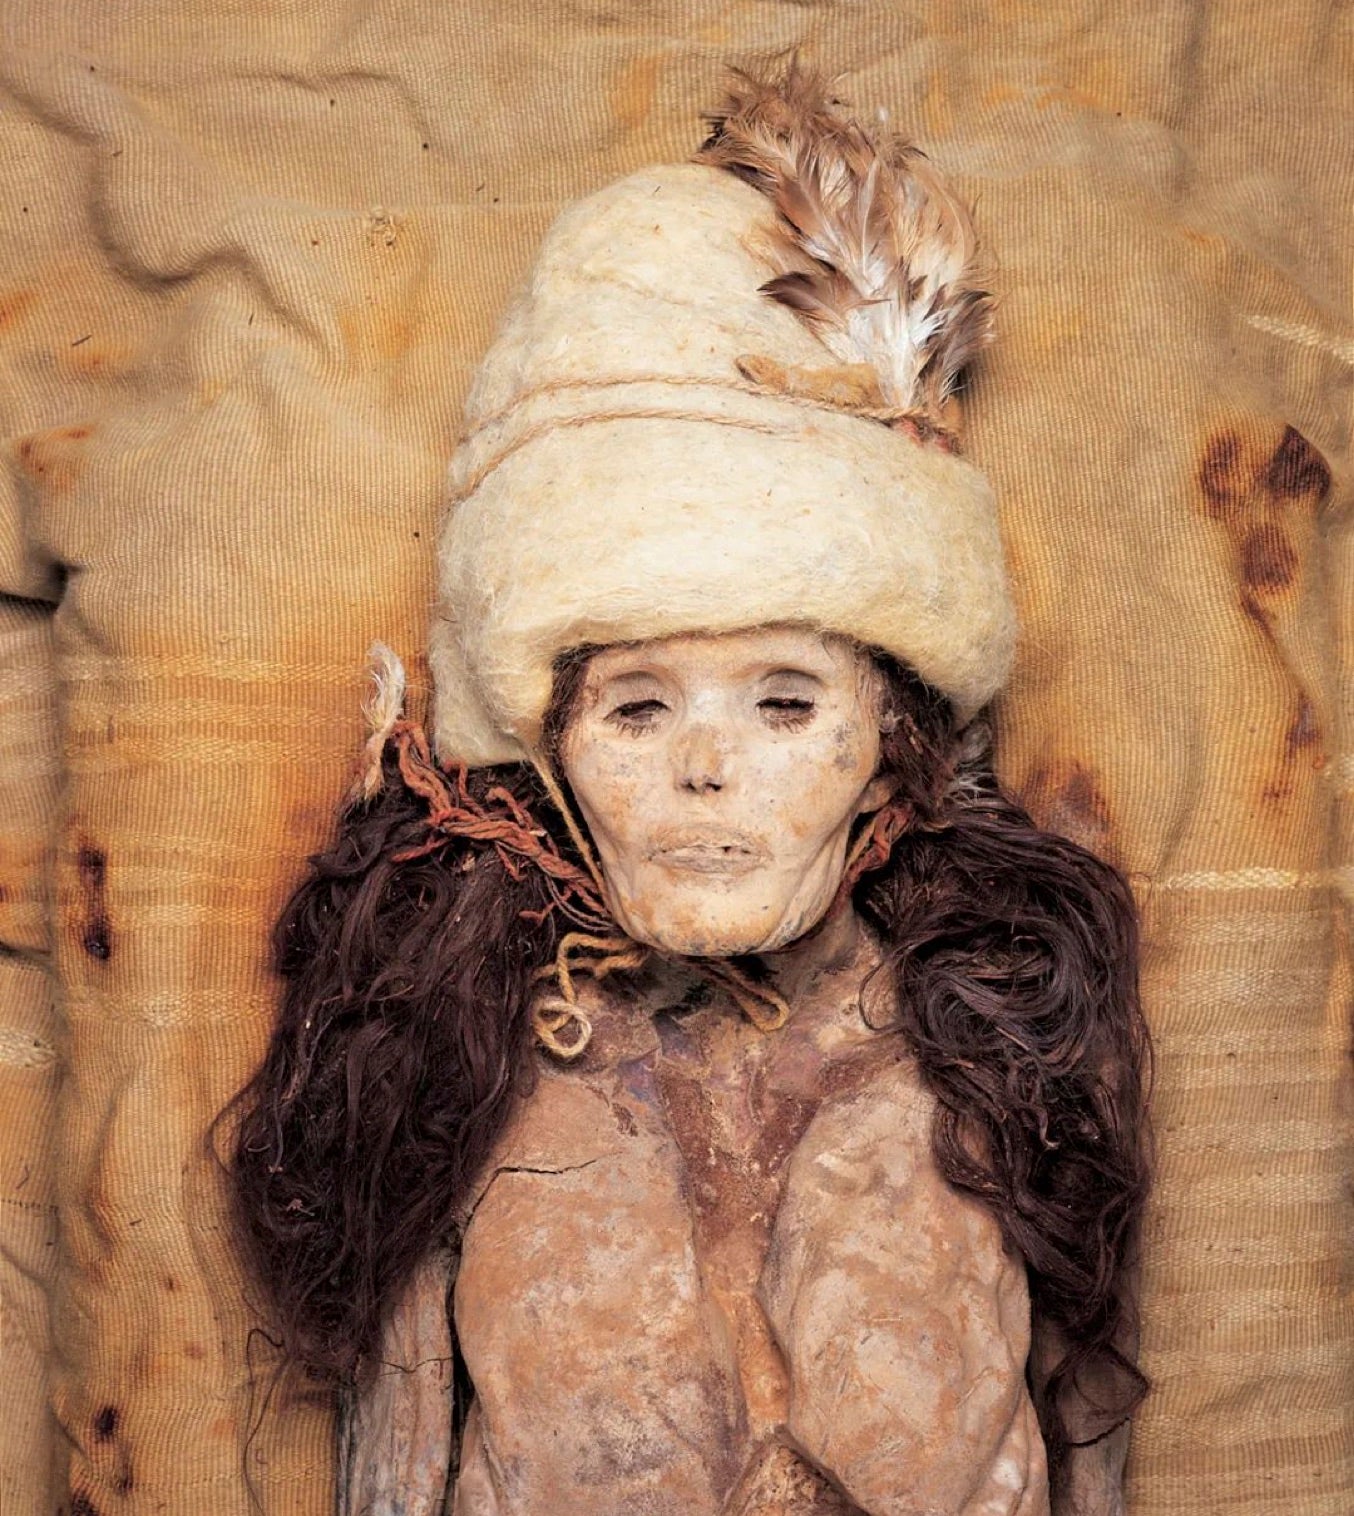 Amazingly Preserved Mummies in China Yield New Clues to Bronze Age Life